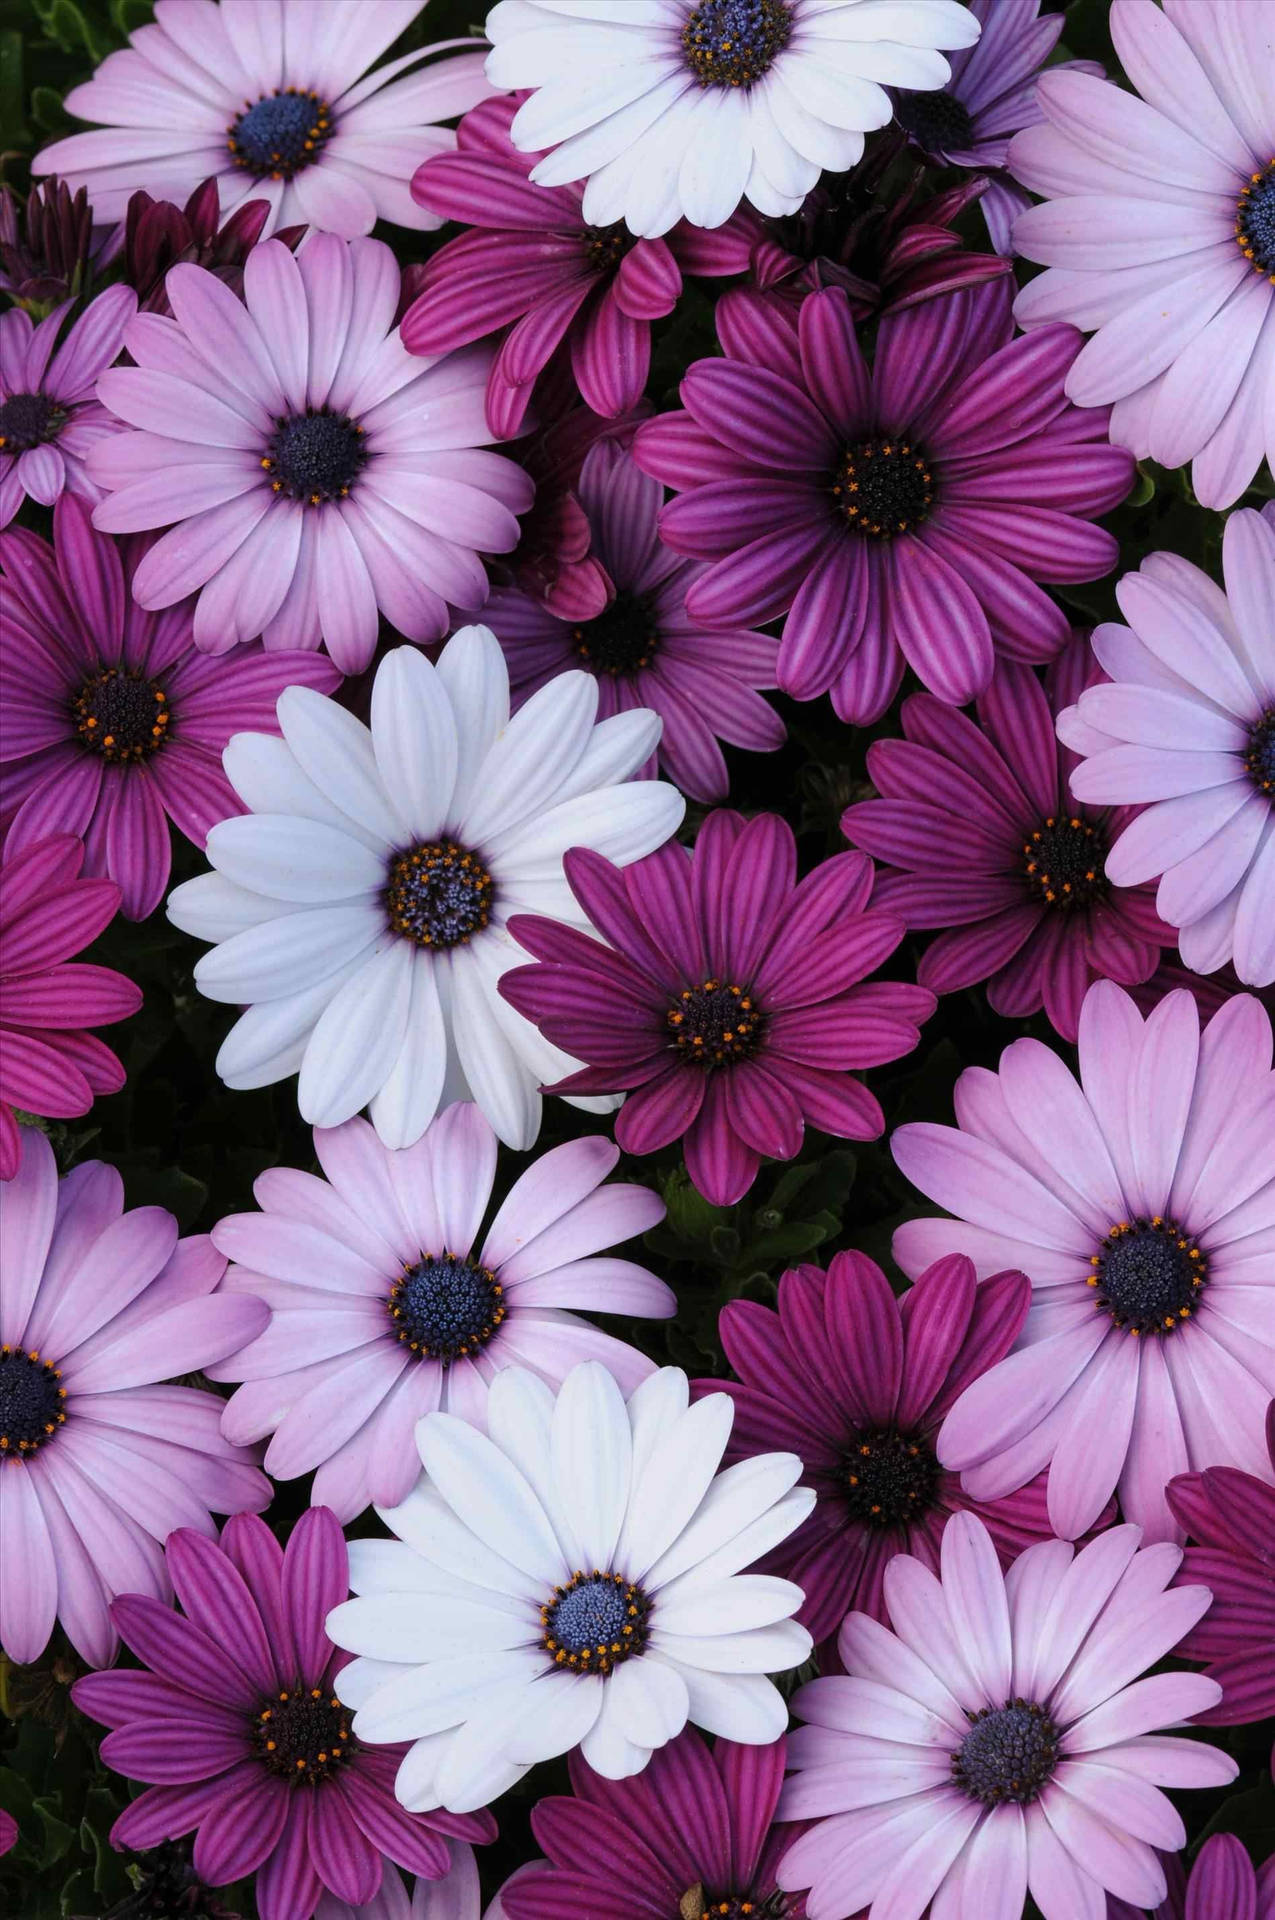 A mesmerizing purple flower stands out boldly against a grey sky. Wallpaper